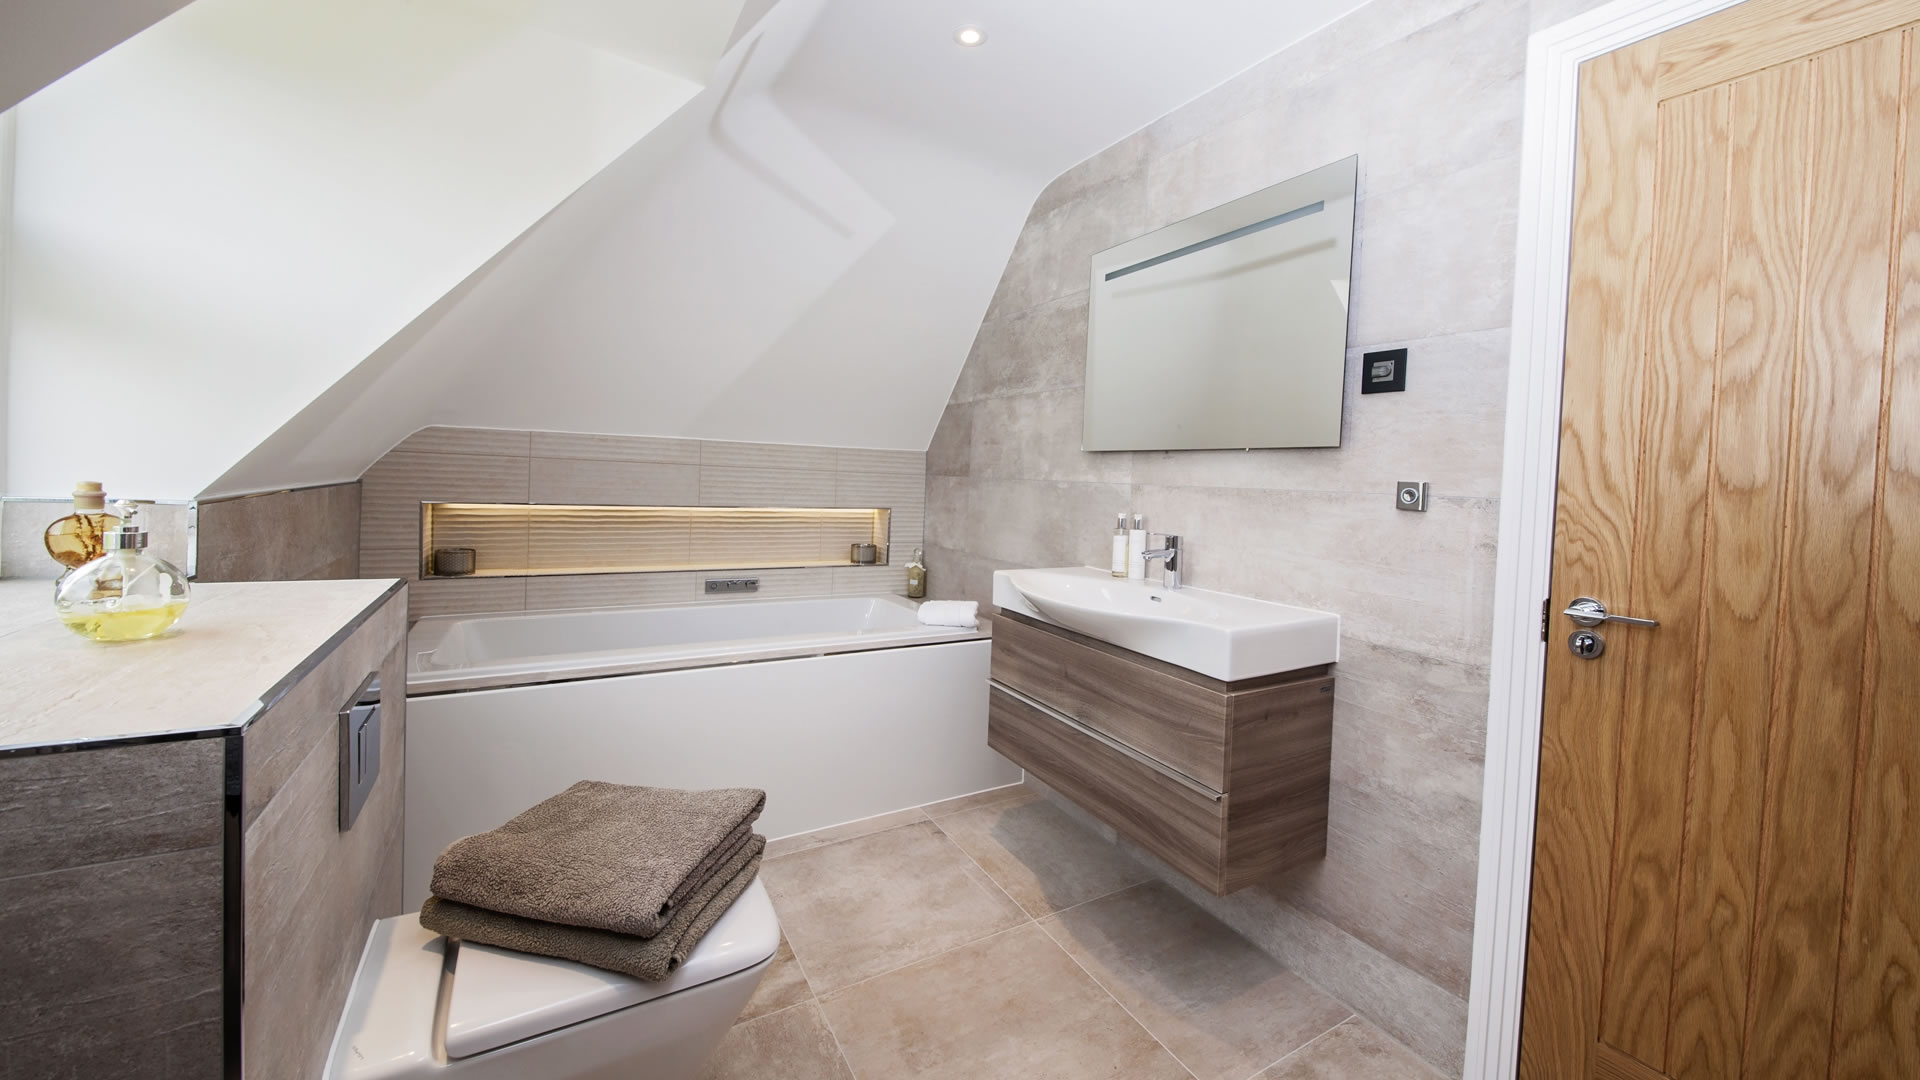 Fitted bathroom at Pilgrims place.